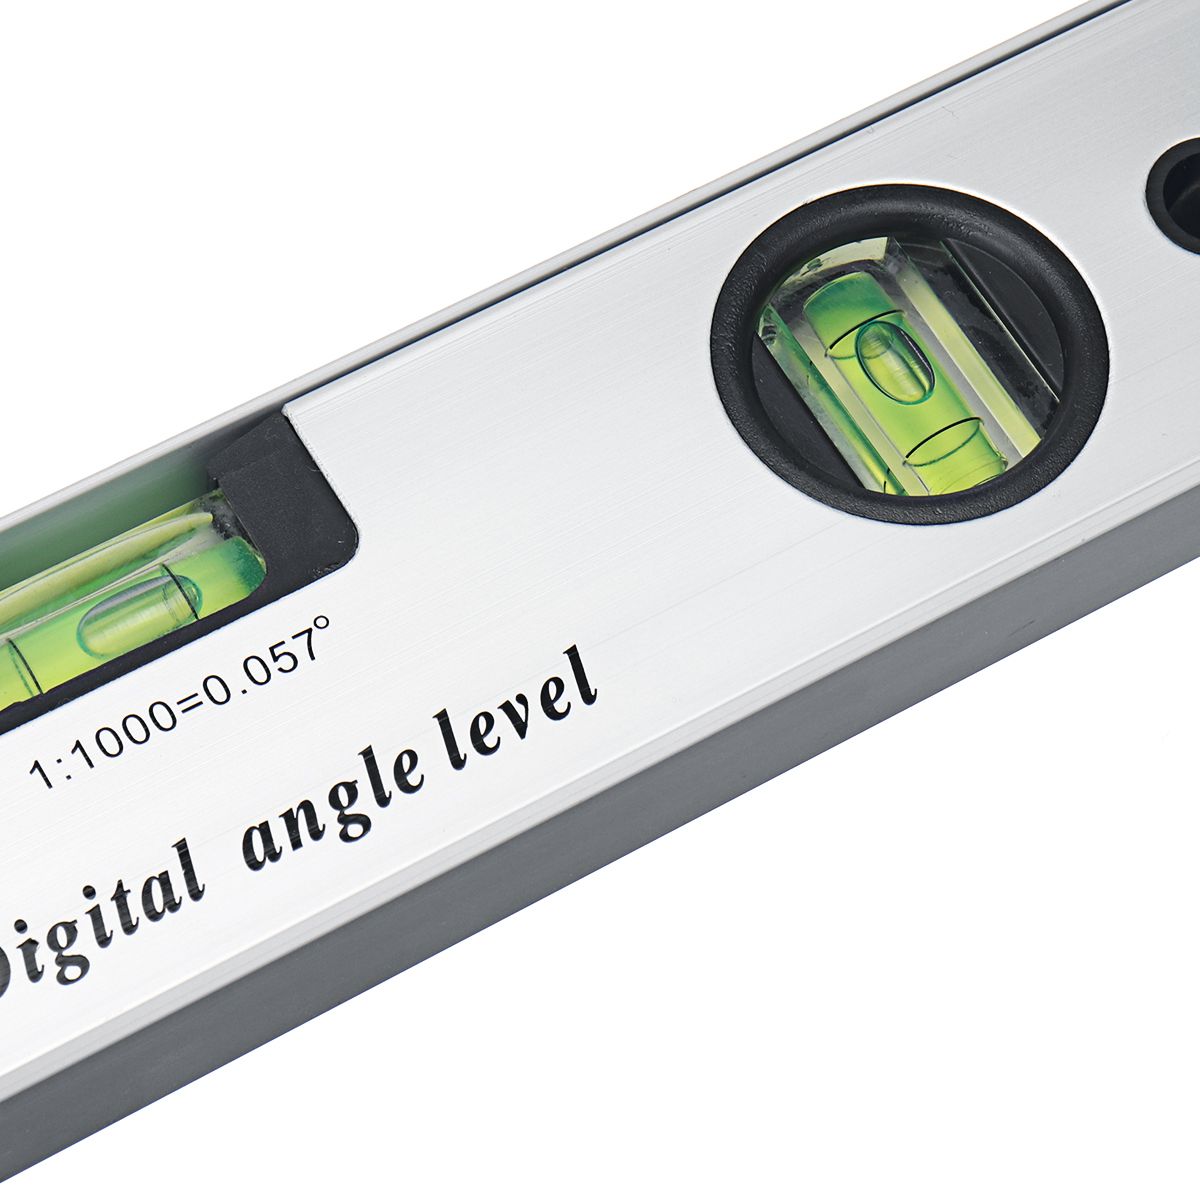 250400mm-Digital-Angle-Level-Meter-LCD-Display-0-225-Degree-for-Measuring-Roof-Angles-Fitting-Up-Win-1740234